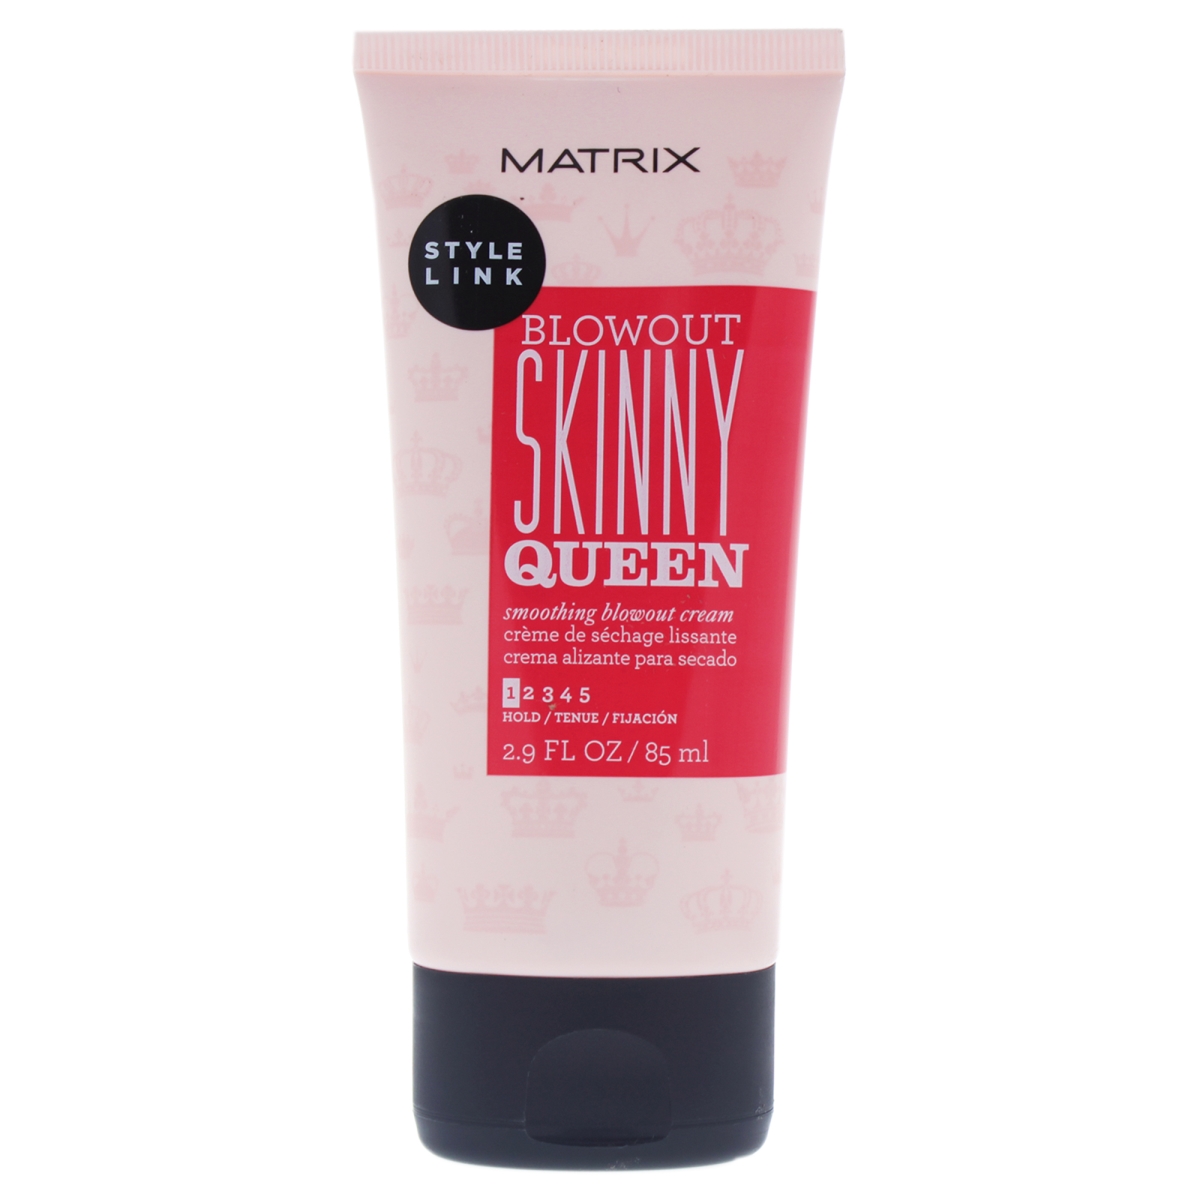 I0084644 2.9 Oz Style Link Skinny Queen Smoothing Blowout Cream For Unisex